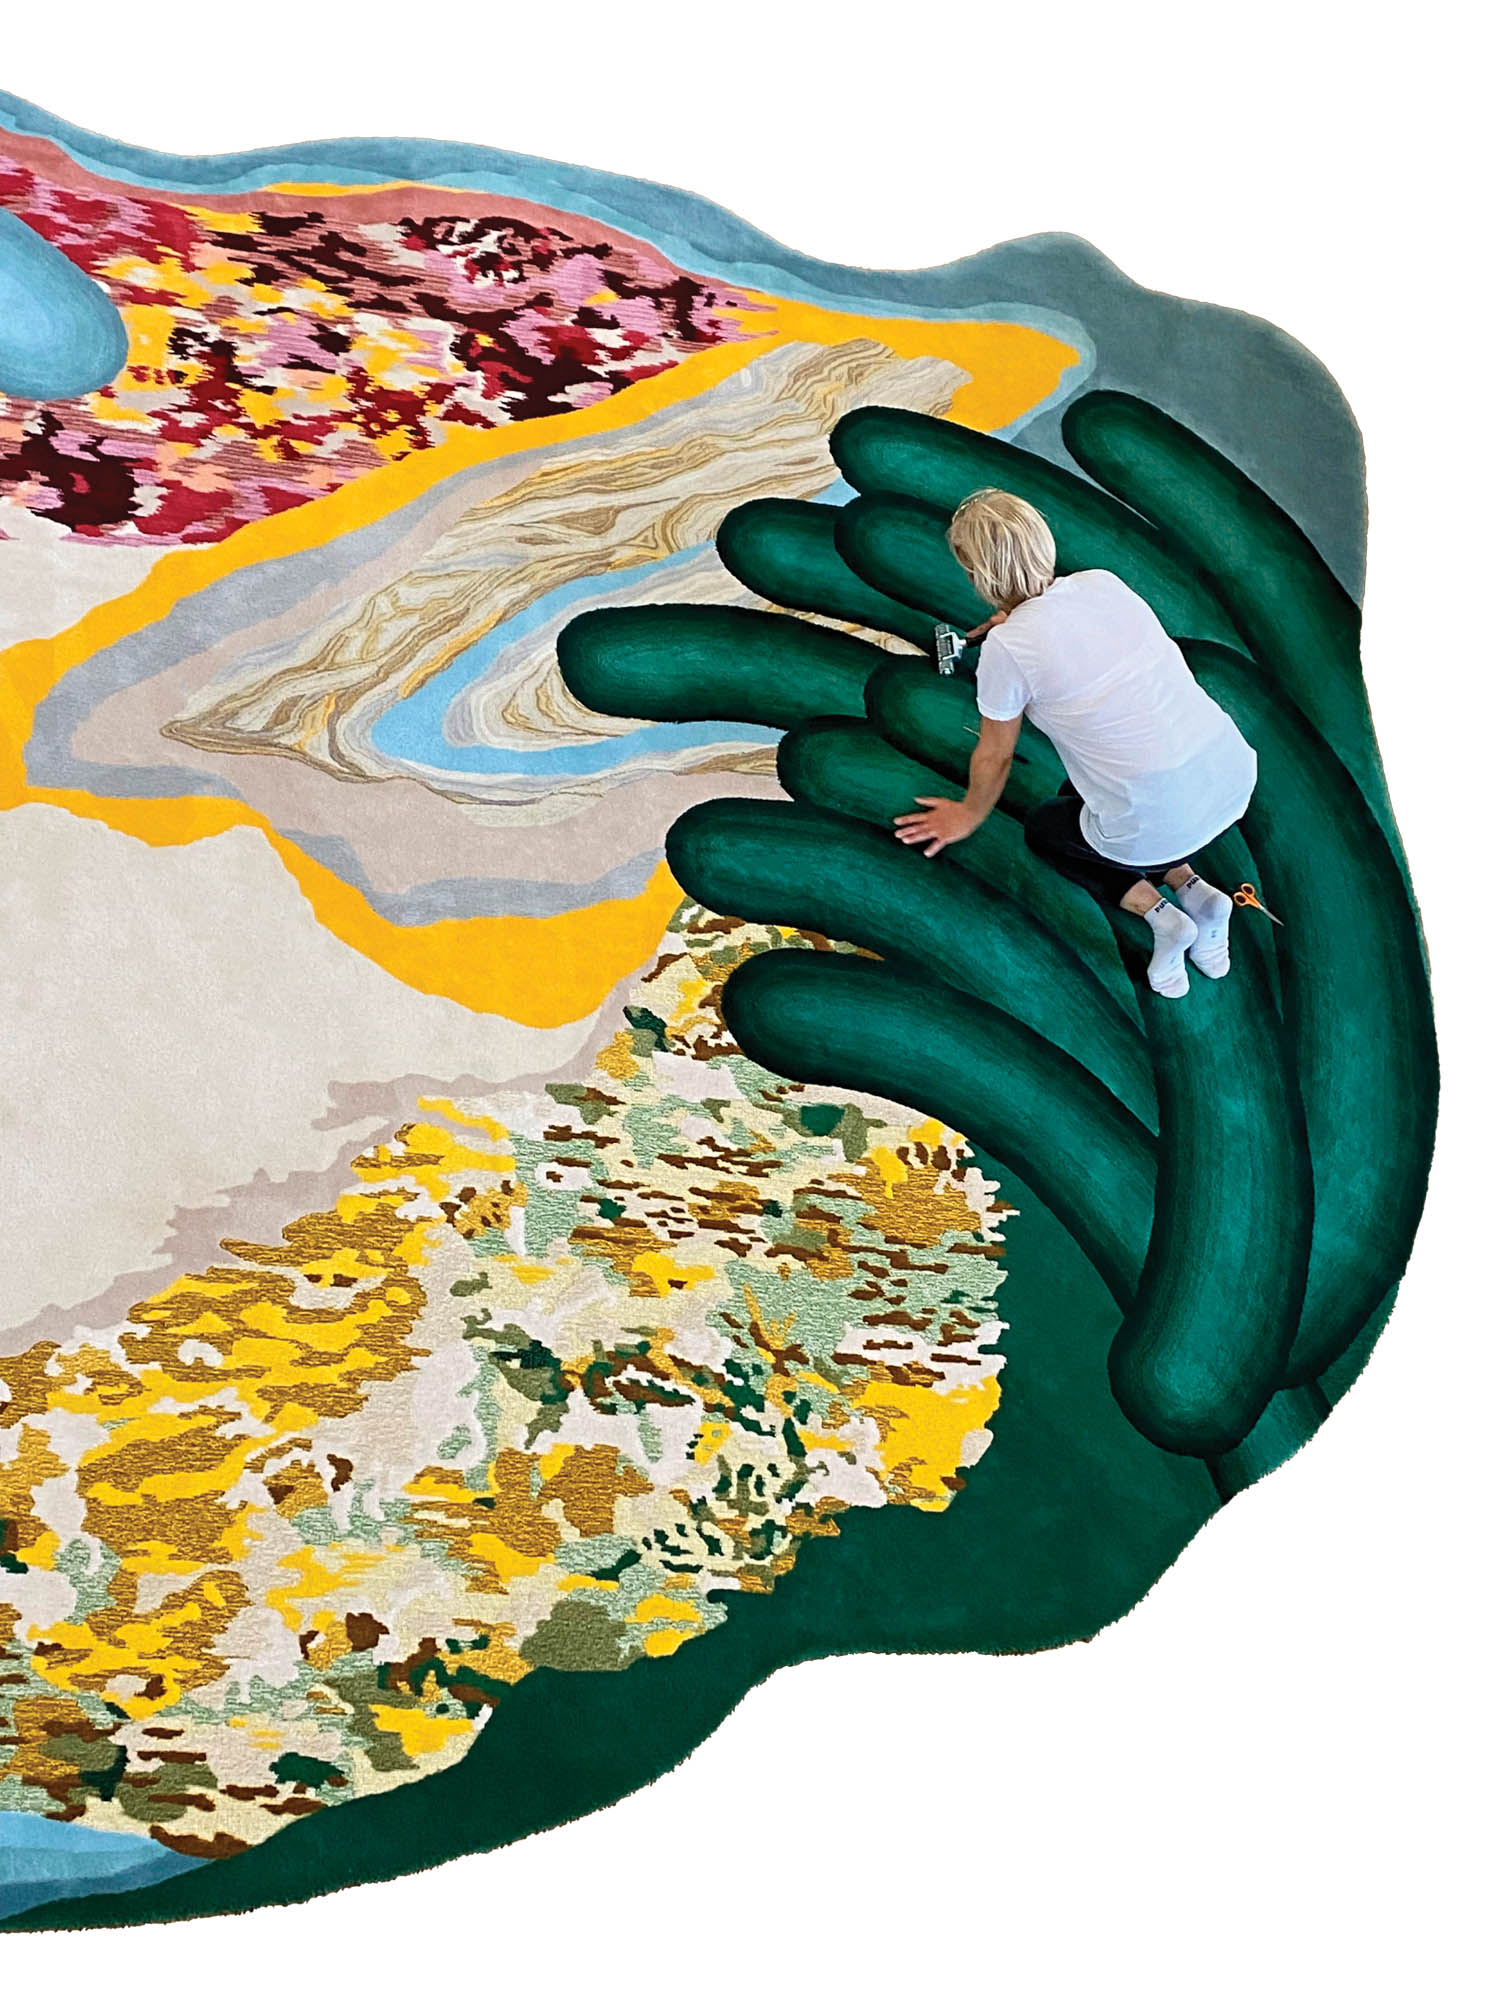 artist Bina Baitel sitting on top of a green hand which spills out into the surrounding scenery